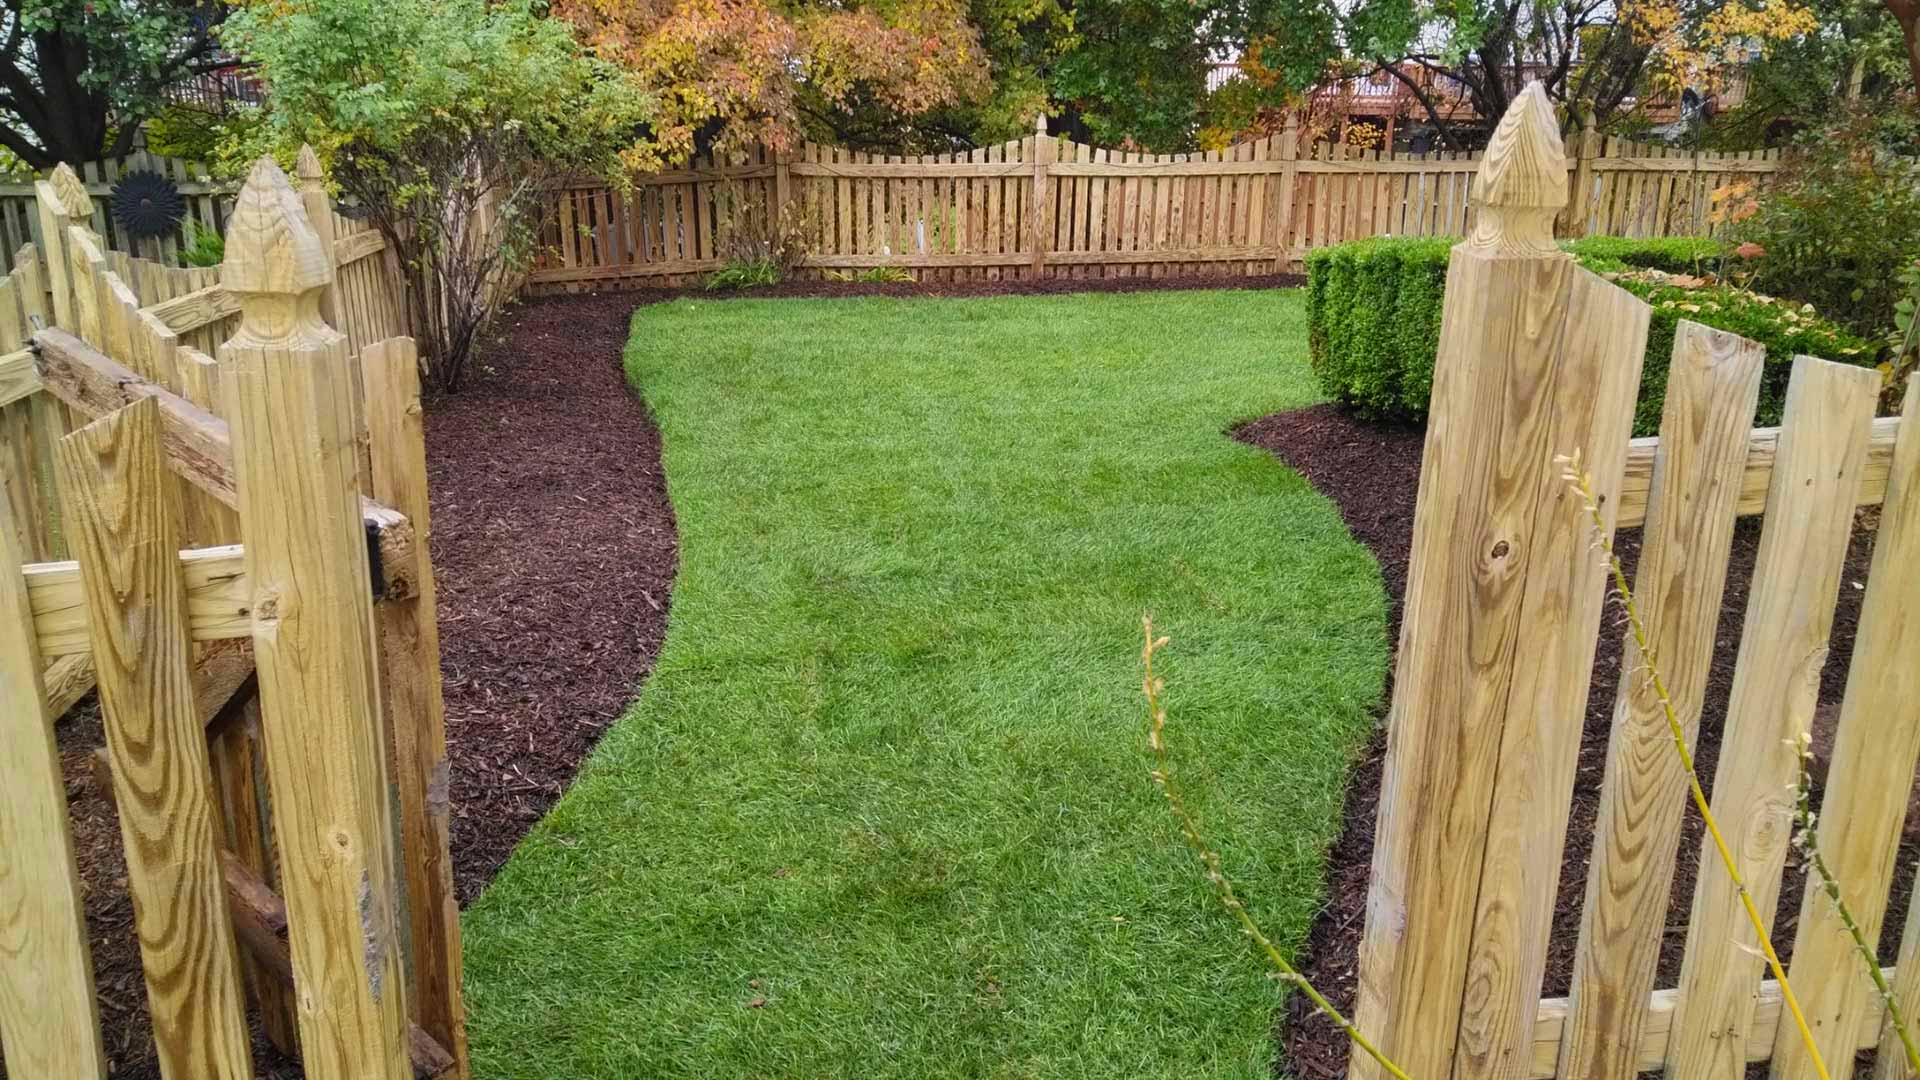 A healthy, green lawn that has been fully restored and rejuvenated.